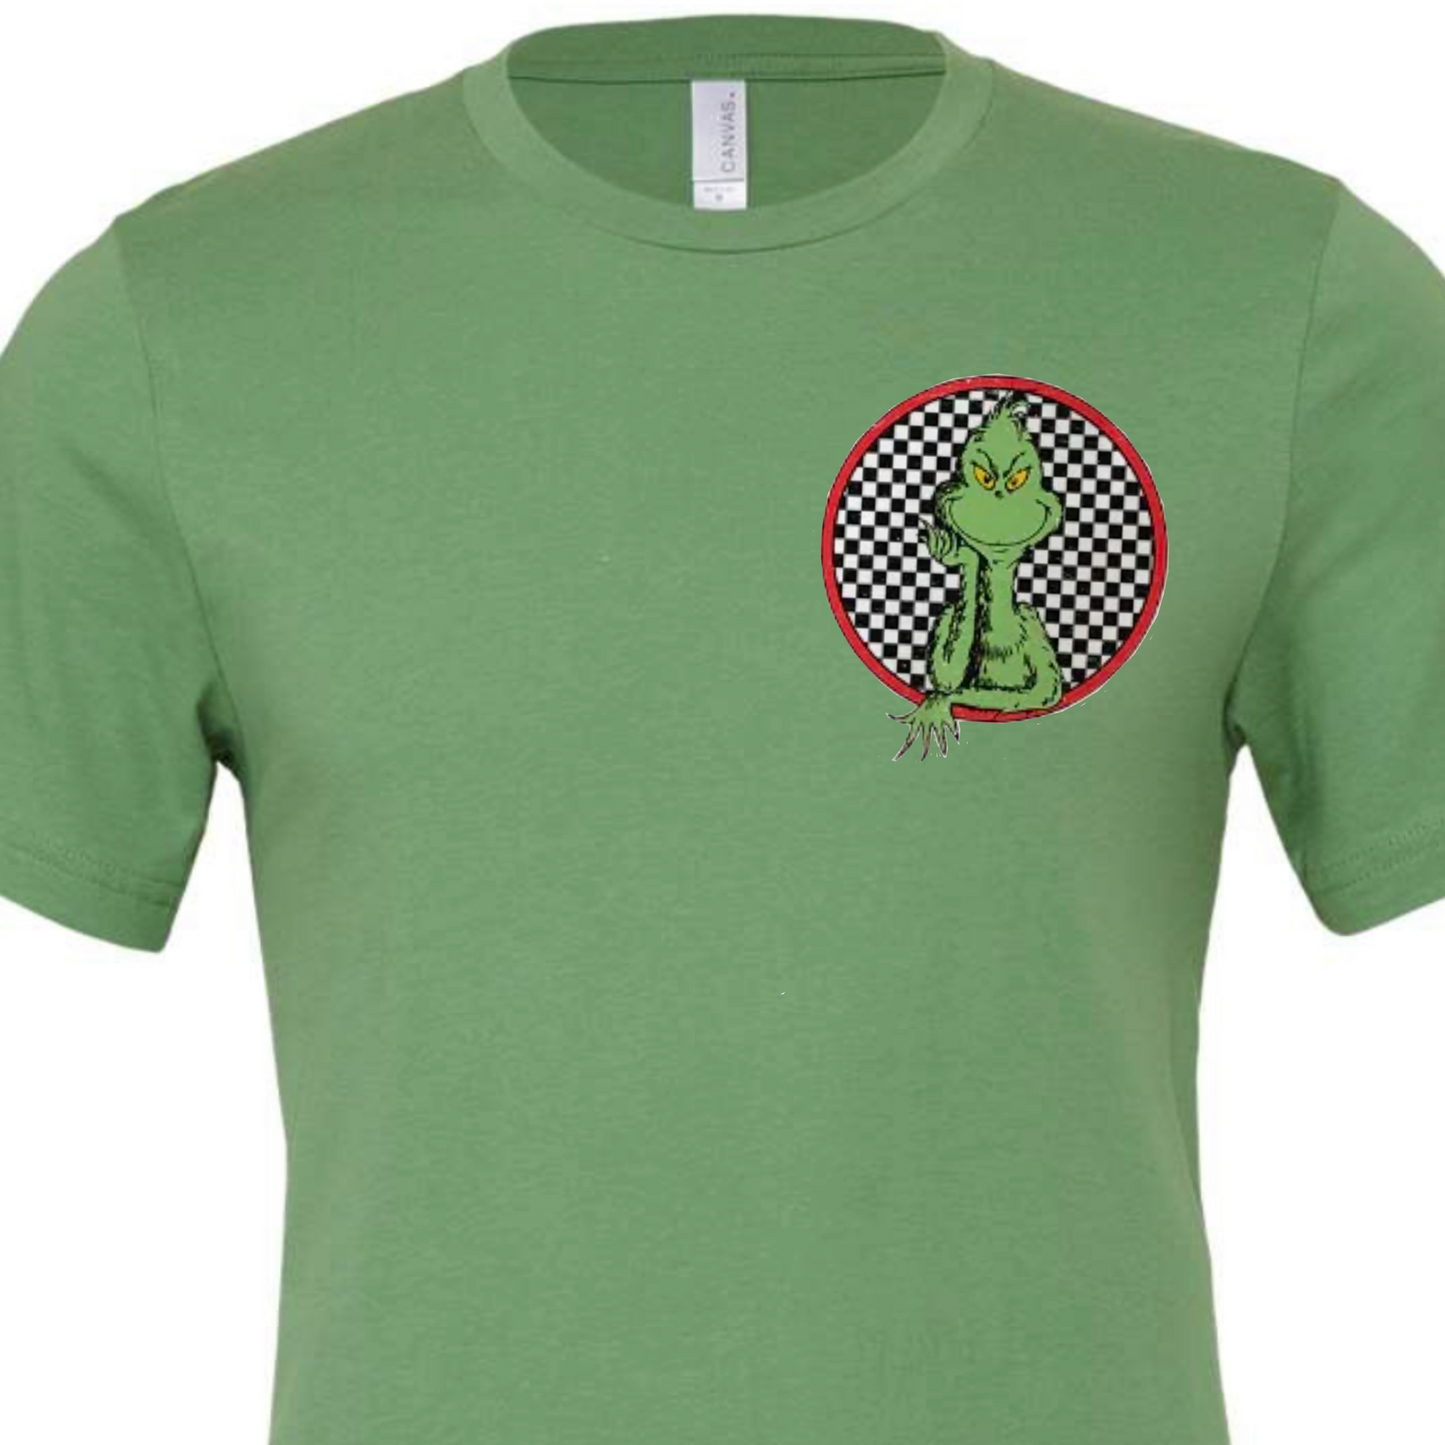 Checkered Mean One Christmas T-Shirt